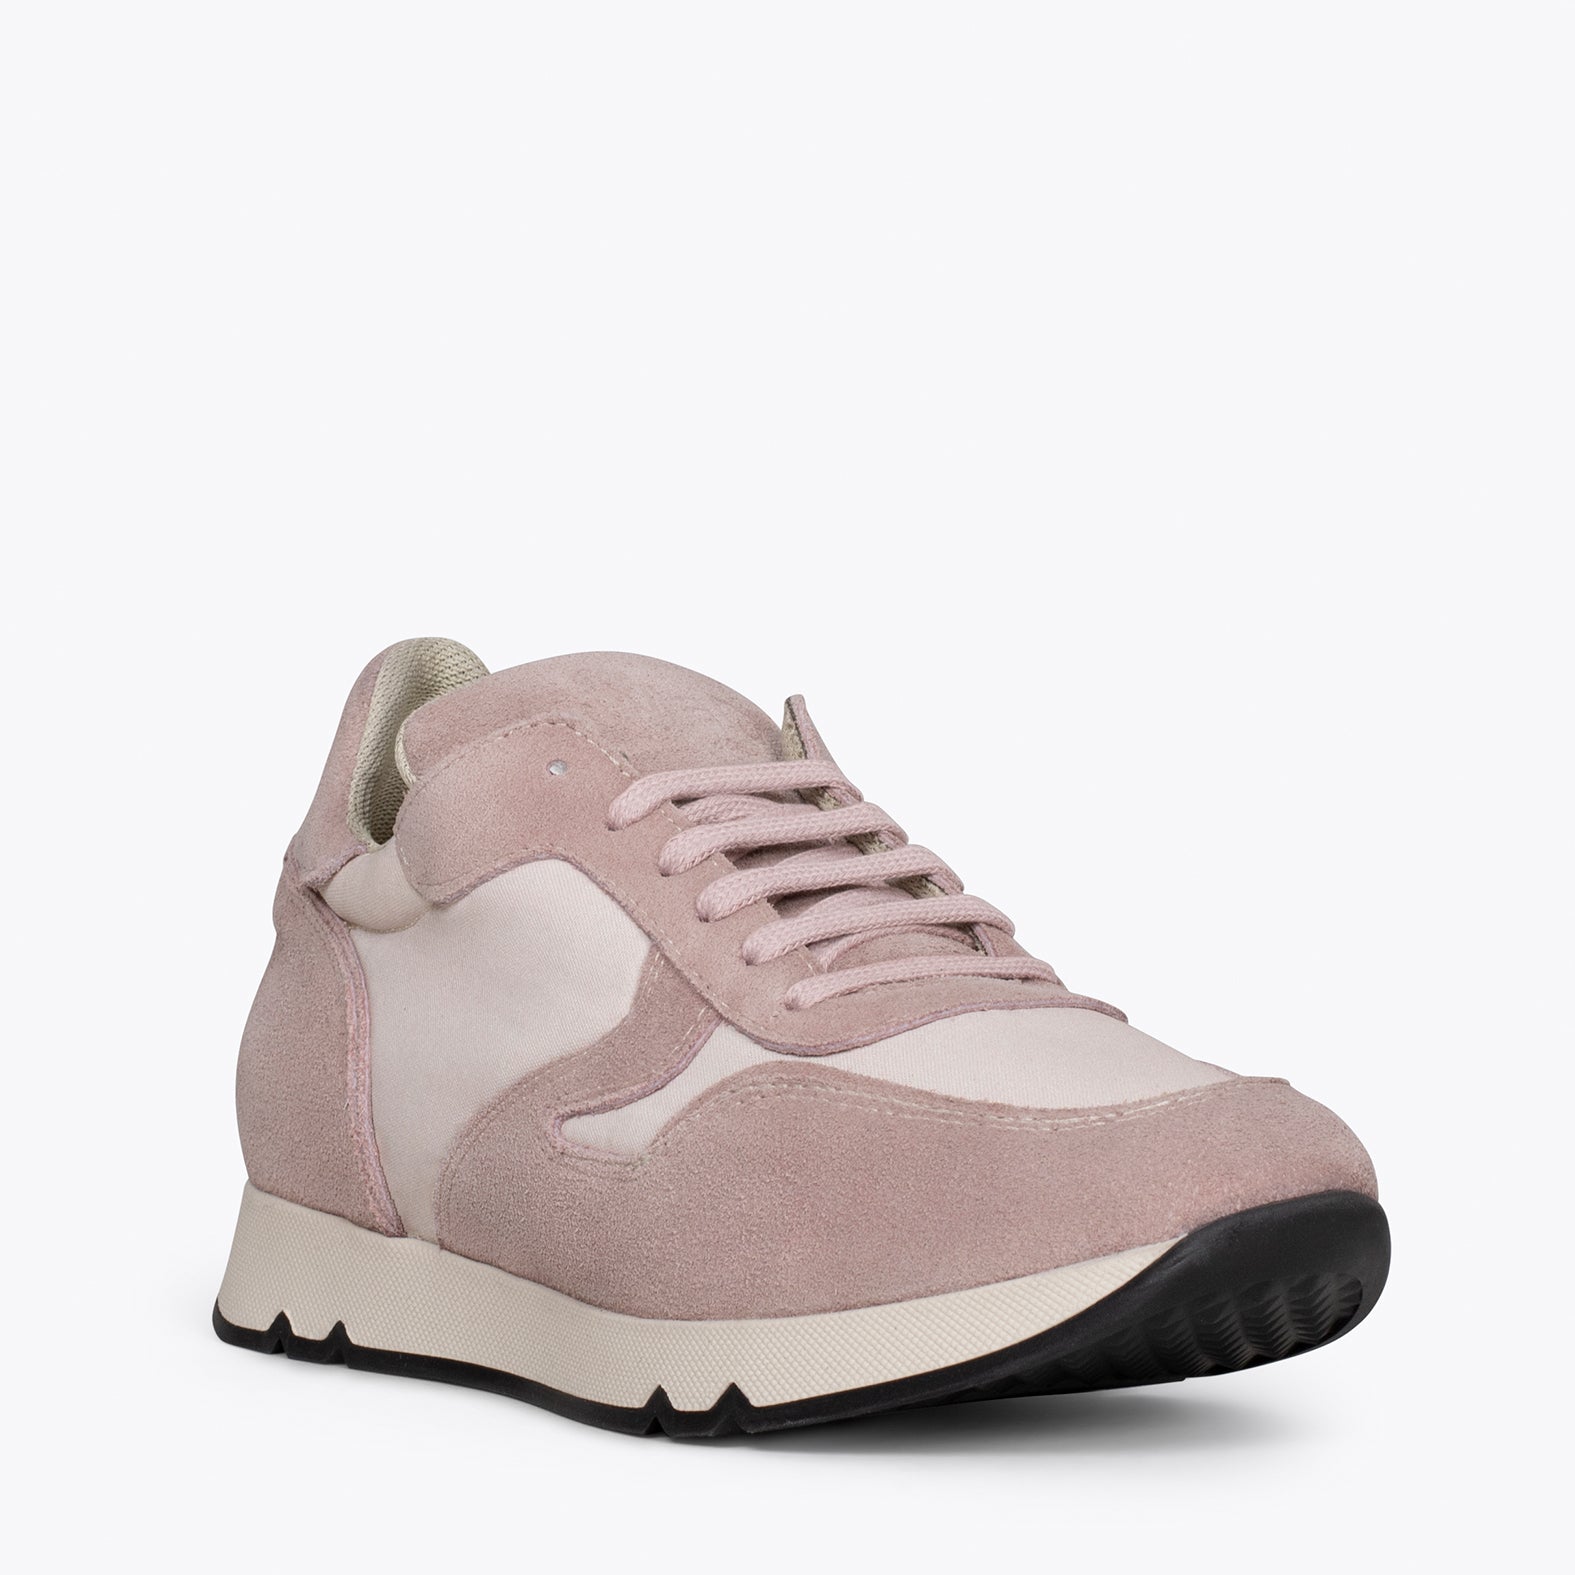 SPORTS – PINK sneakers for women